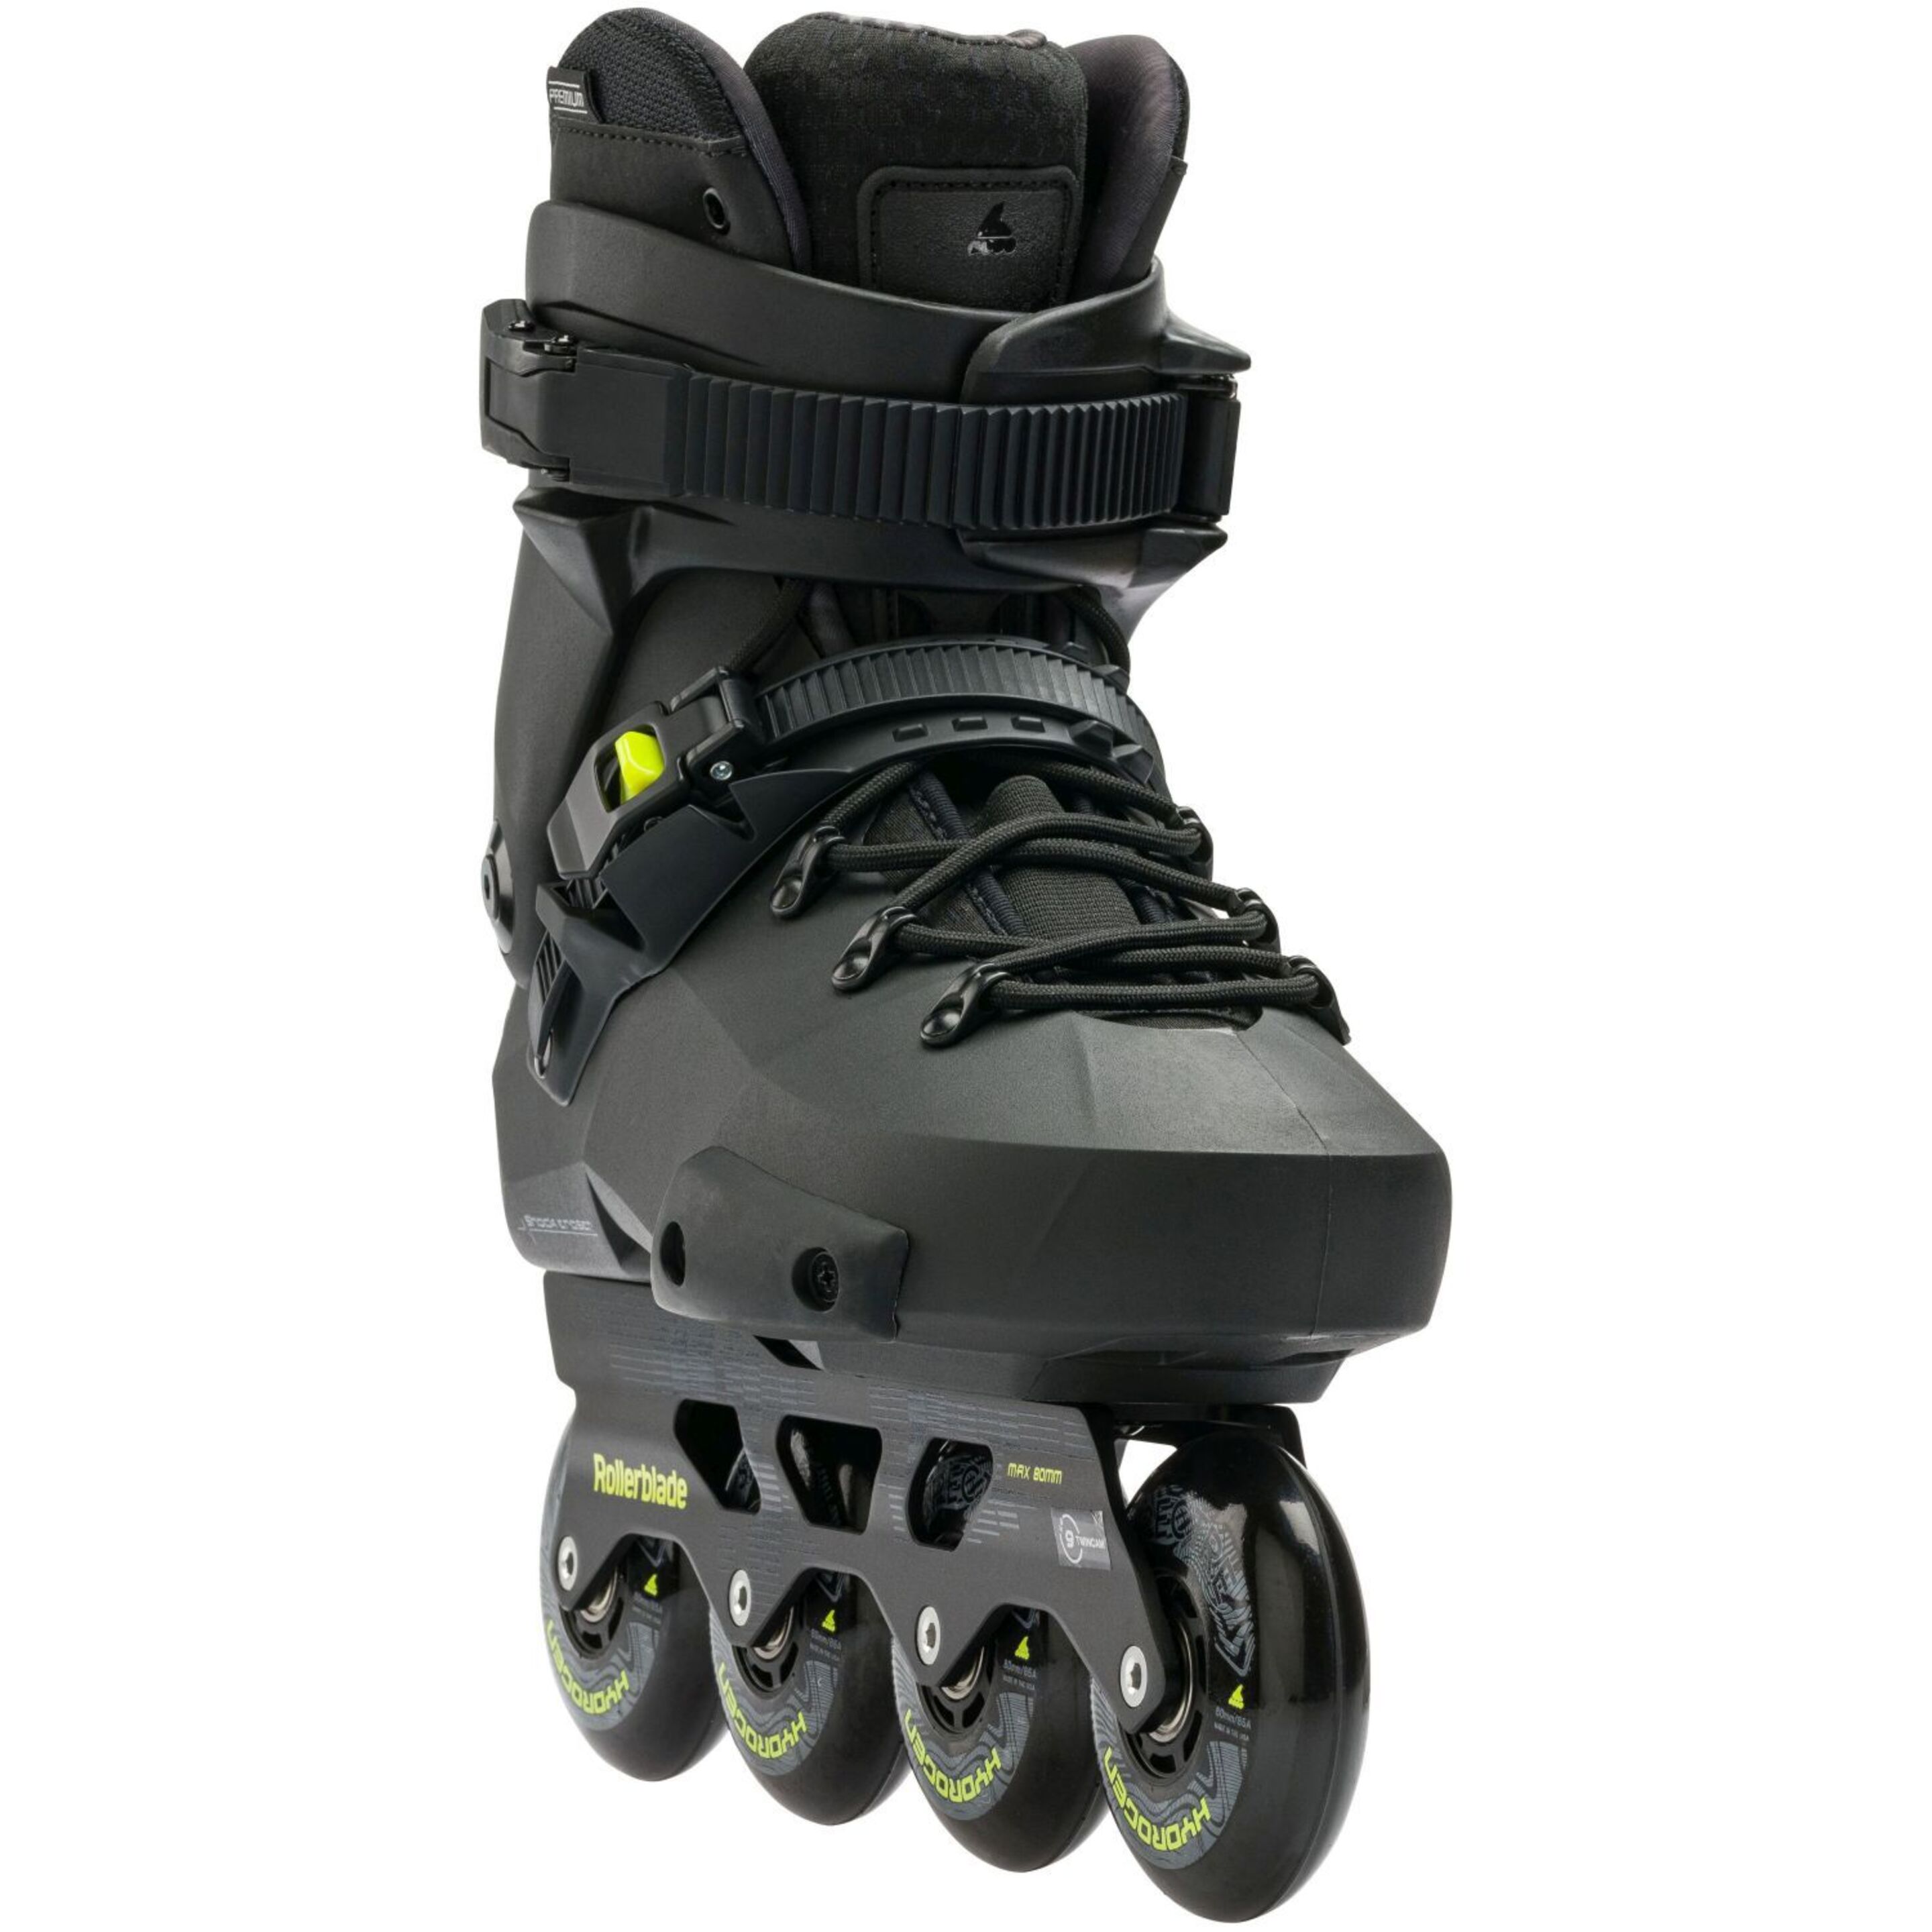 Patines Twister Xt Rollerblade